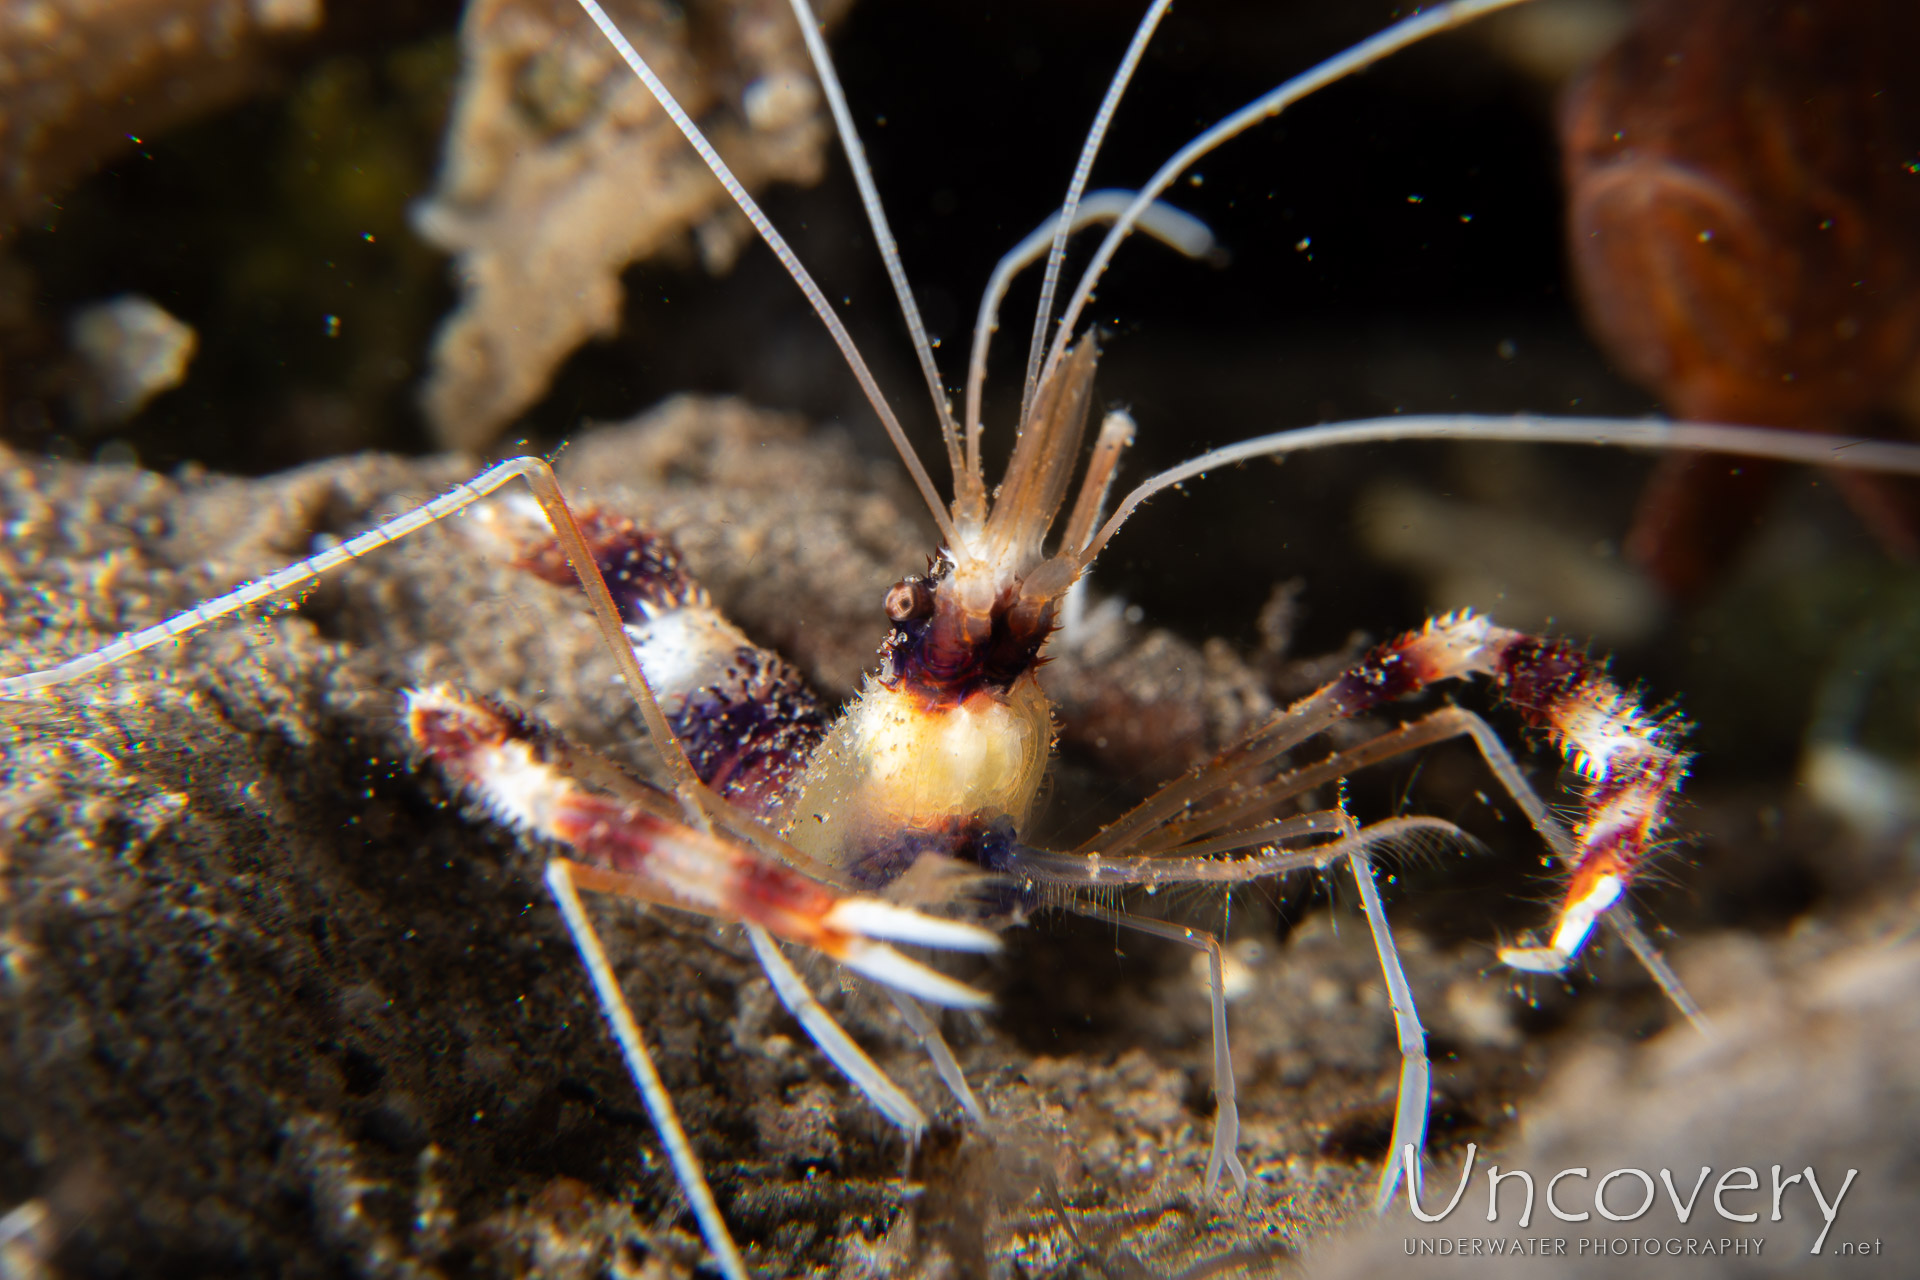 Banded Coral Shrimp (stenopus Hispidus), photo taken in Philippines, Negros Oriental, Dauin, Airlac's